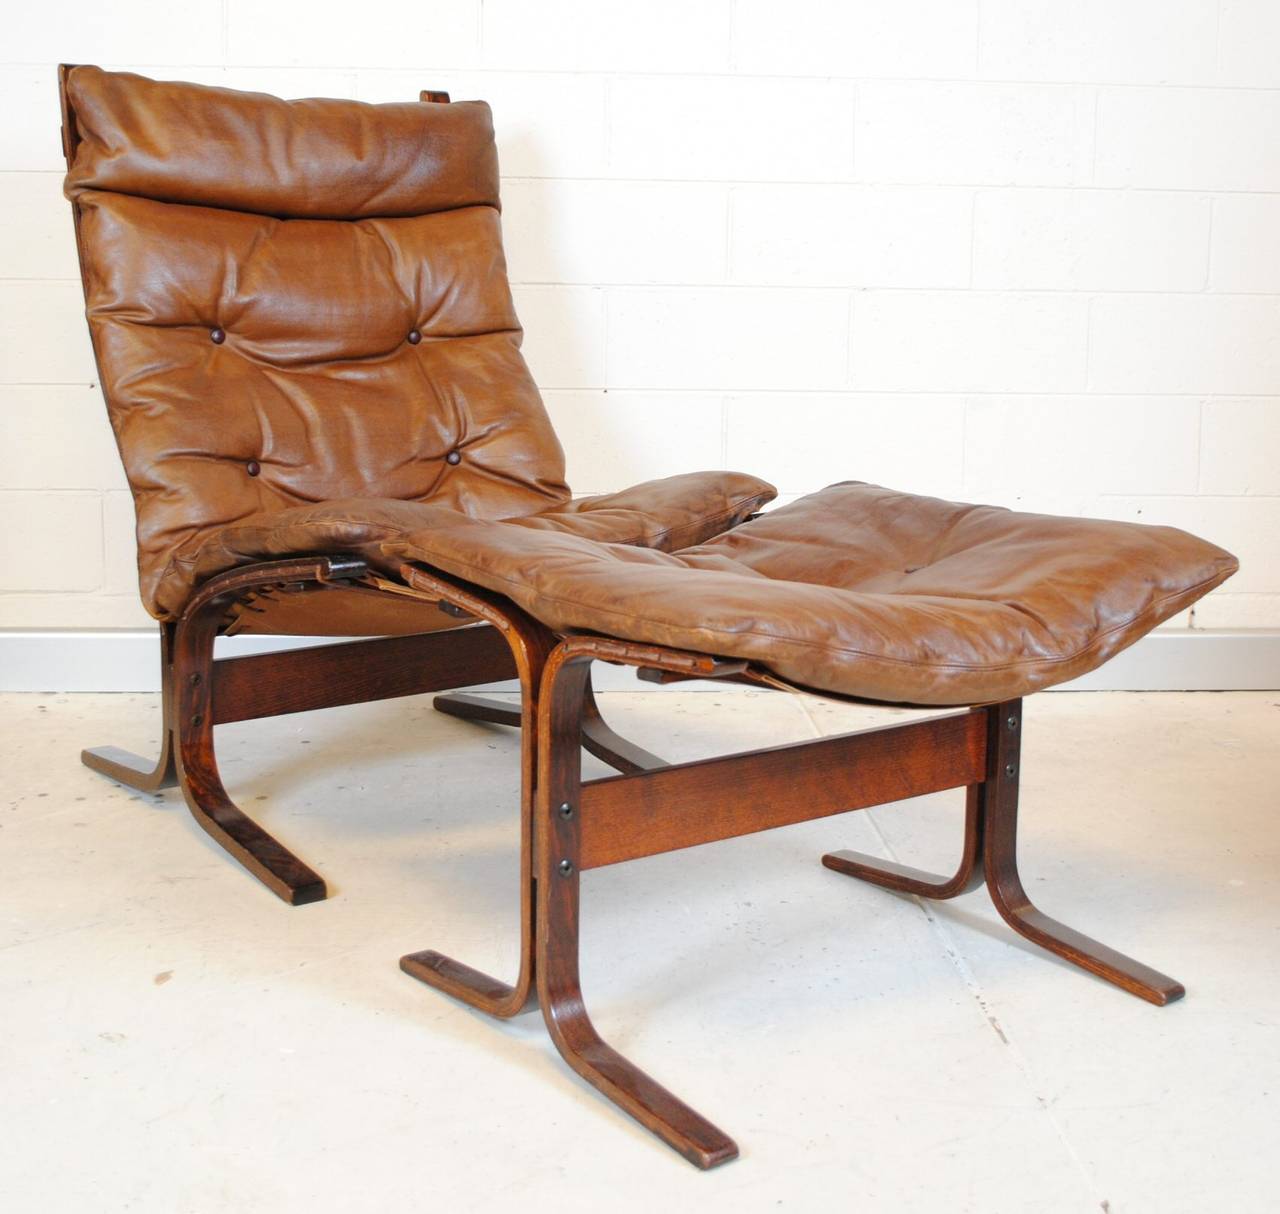 Scandinavian Modern rosewood framed leather siesta chair and matching stool. From Westnofa of Norway, designed by Ingmar Relling, and winner of the 1966 design award in Copenhagen.

For those interested we do have another chair and stool just like